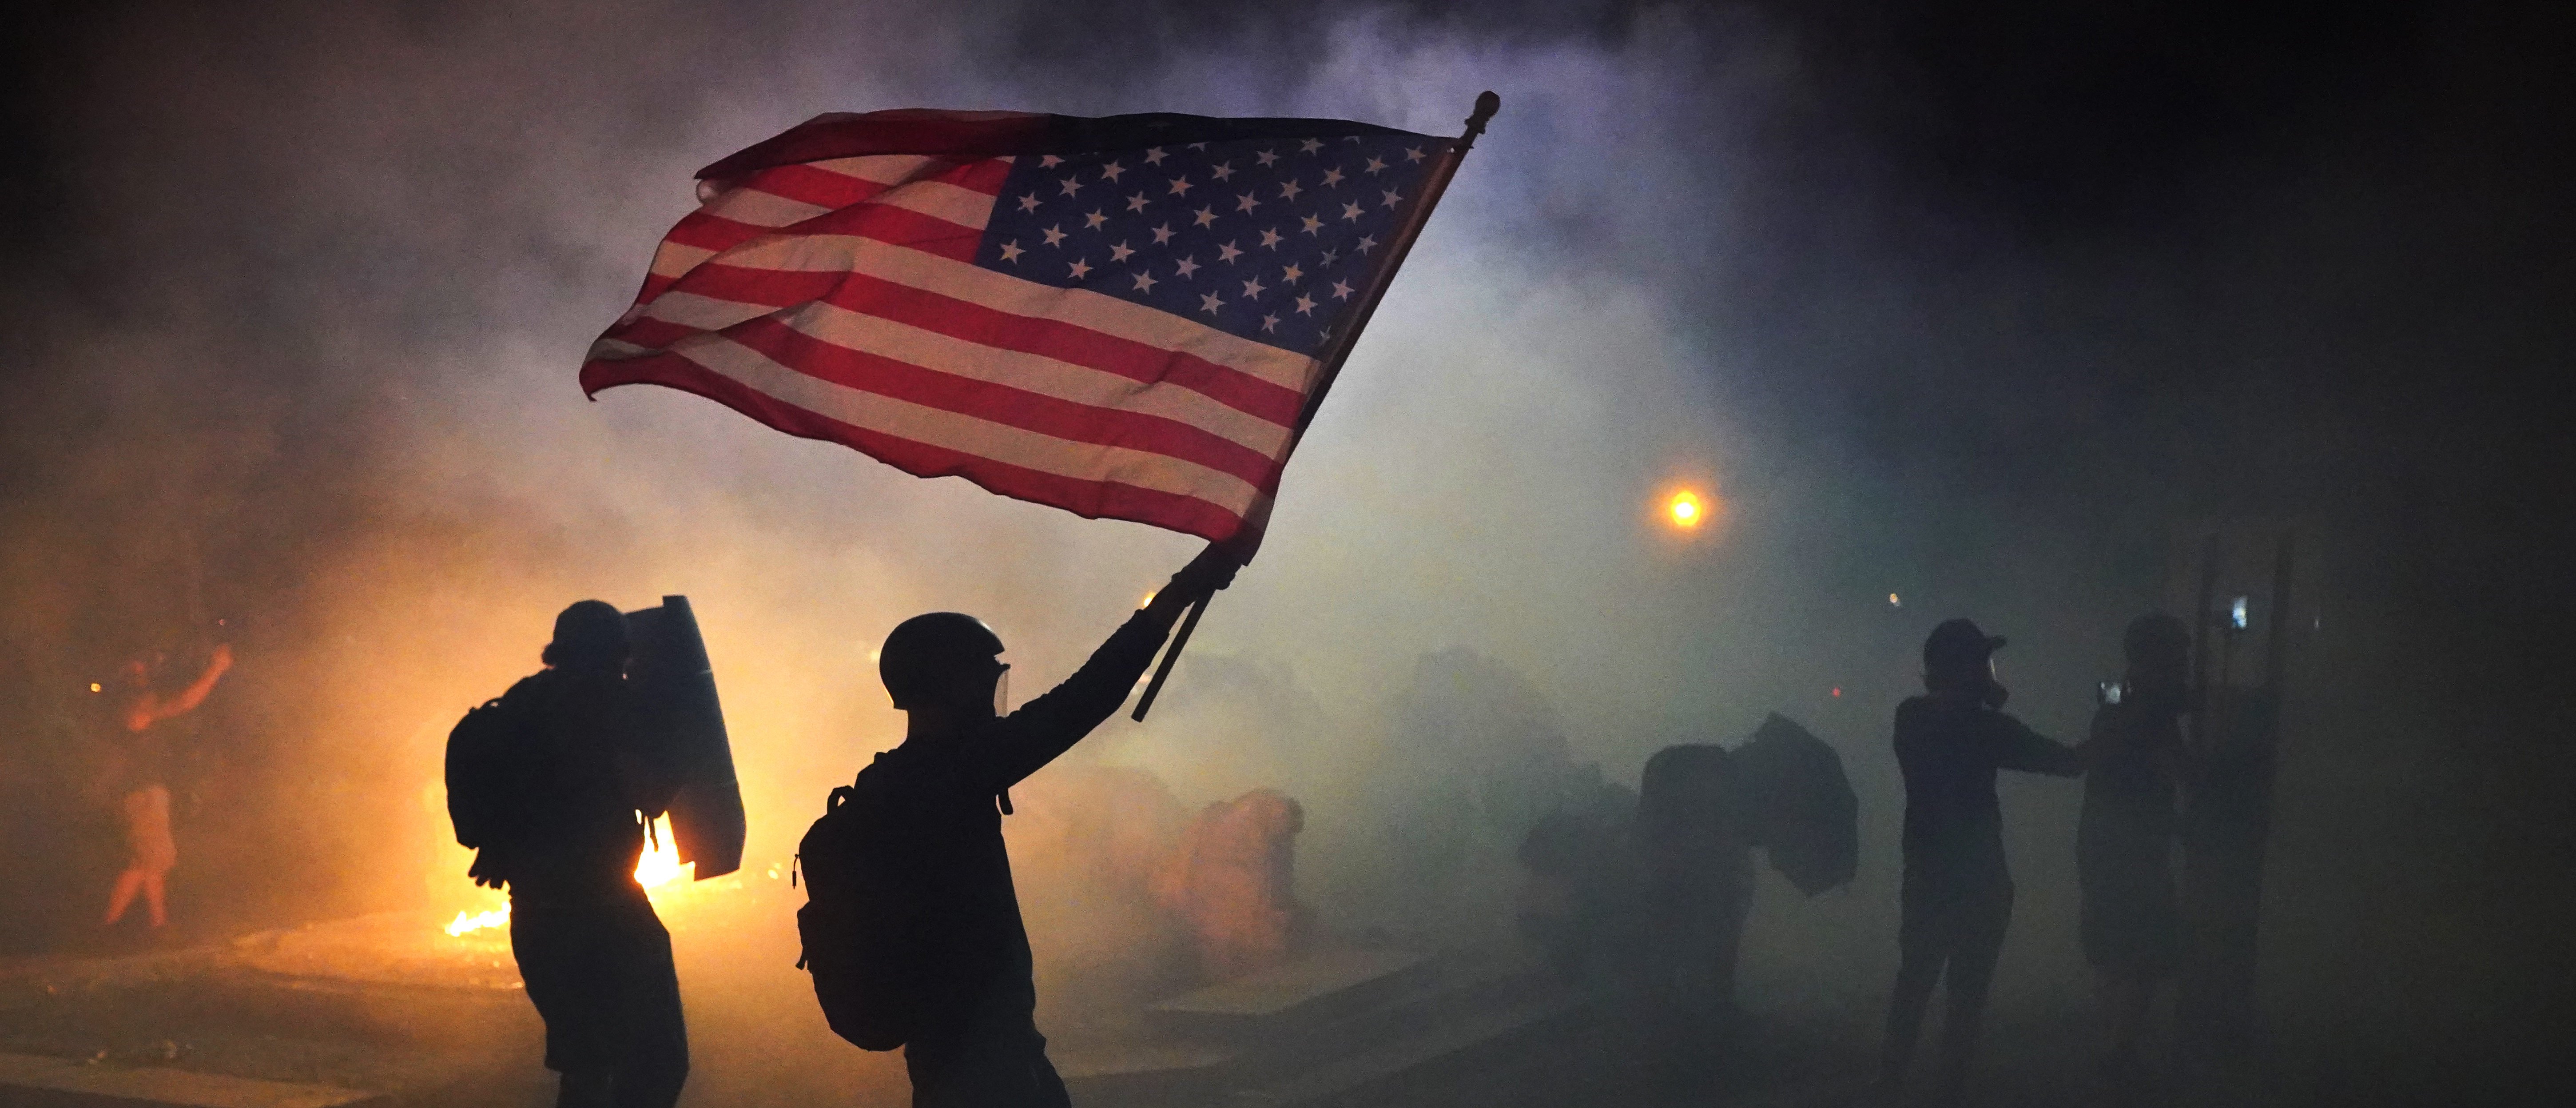 PORTLAND, OR - JULY 21: A protester flies an American flag while walking through tear gas fired by federal officers during a protest in front of the Mark O. Hatfield U.S. Courthouse on July 21, 2020 in Portland, Oregon. The federal police response to the ongoing protests against racial inequality has been criticized by city and state elected officials. (Photo by Nathan Howard/Getty Images)